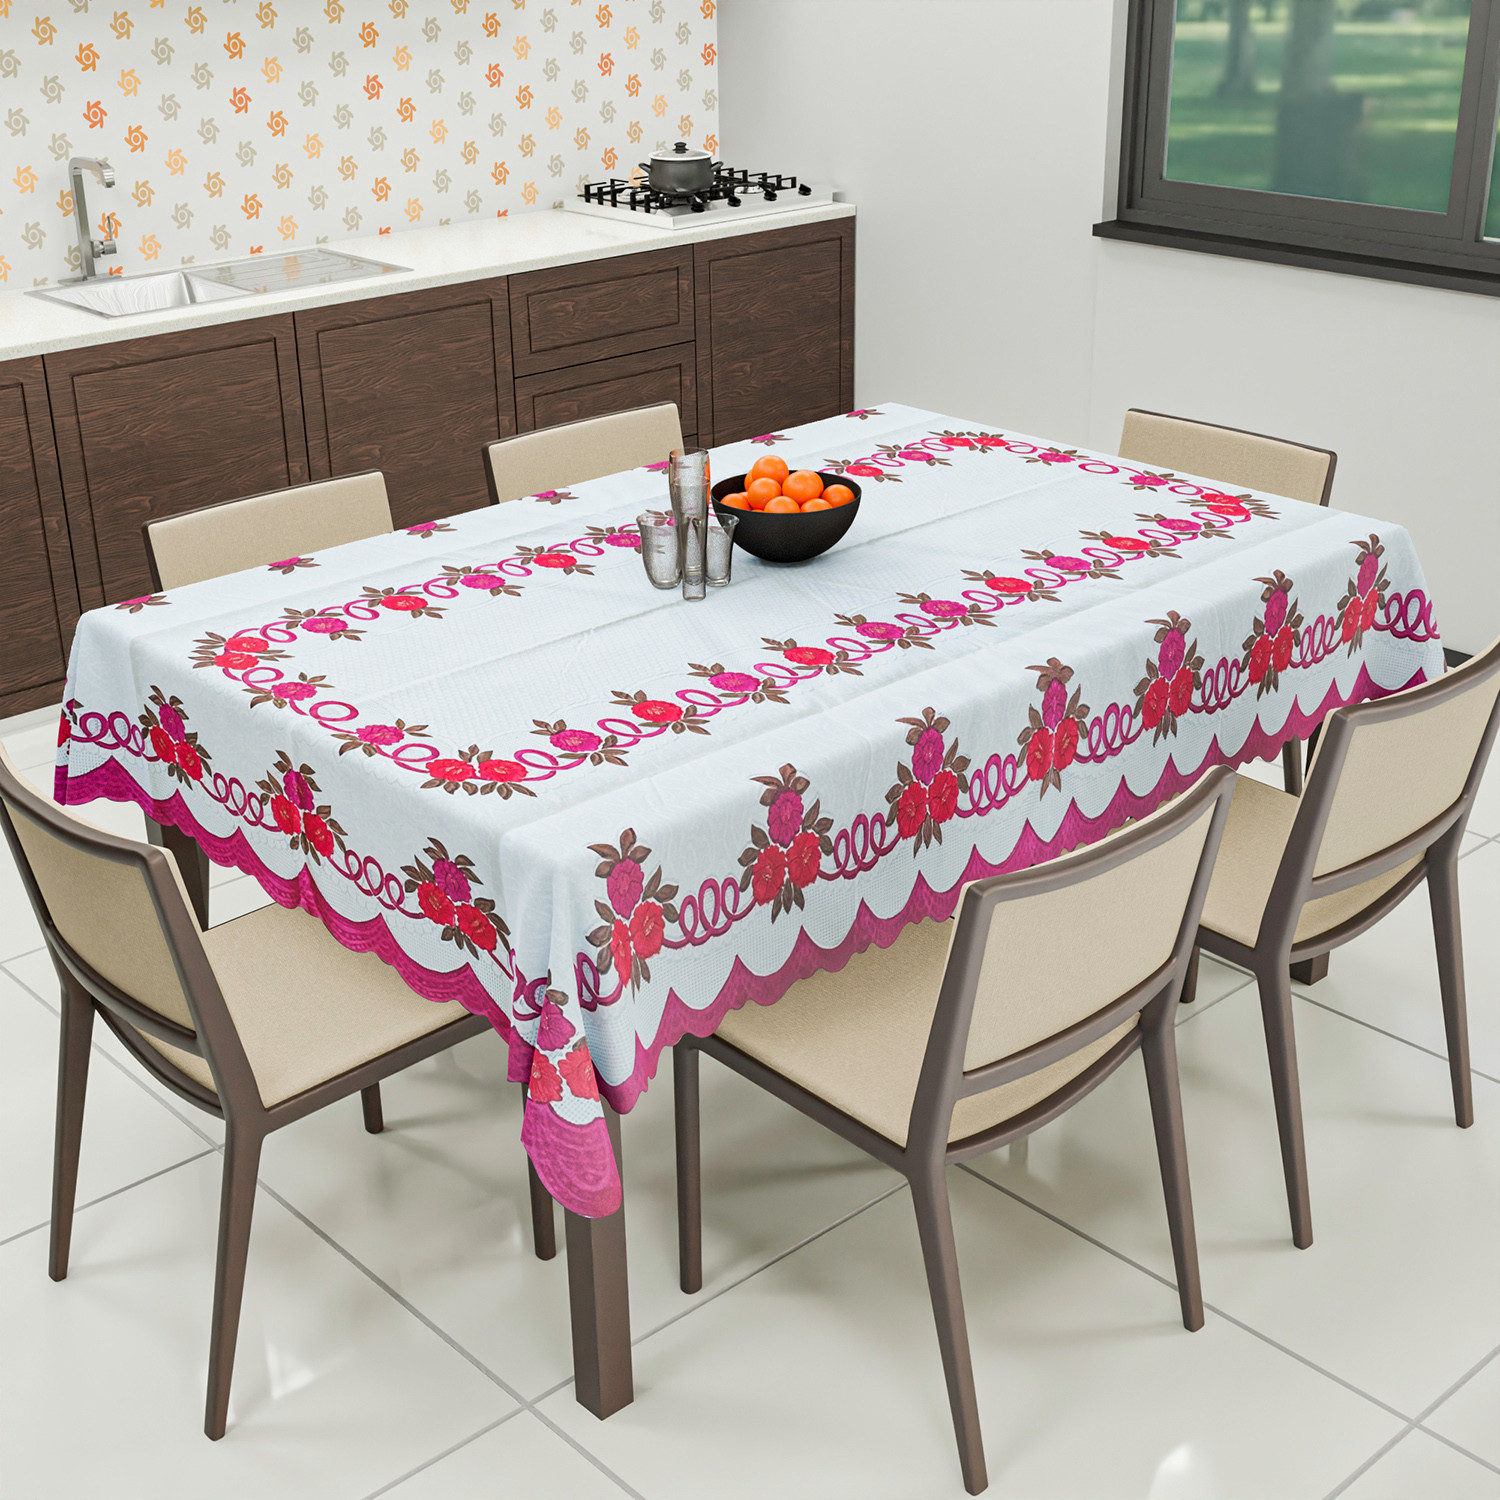 Kuber Industries Cotton Floral Print Waterproof Attractive Dining Table Cover|Tablecloth for Home Decorative, 60x90 Inch (White Pink)